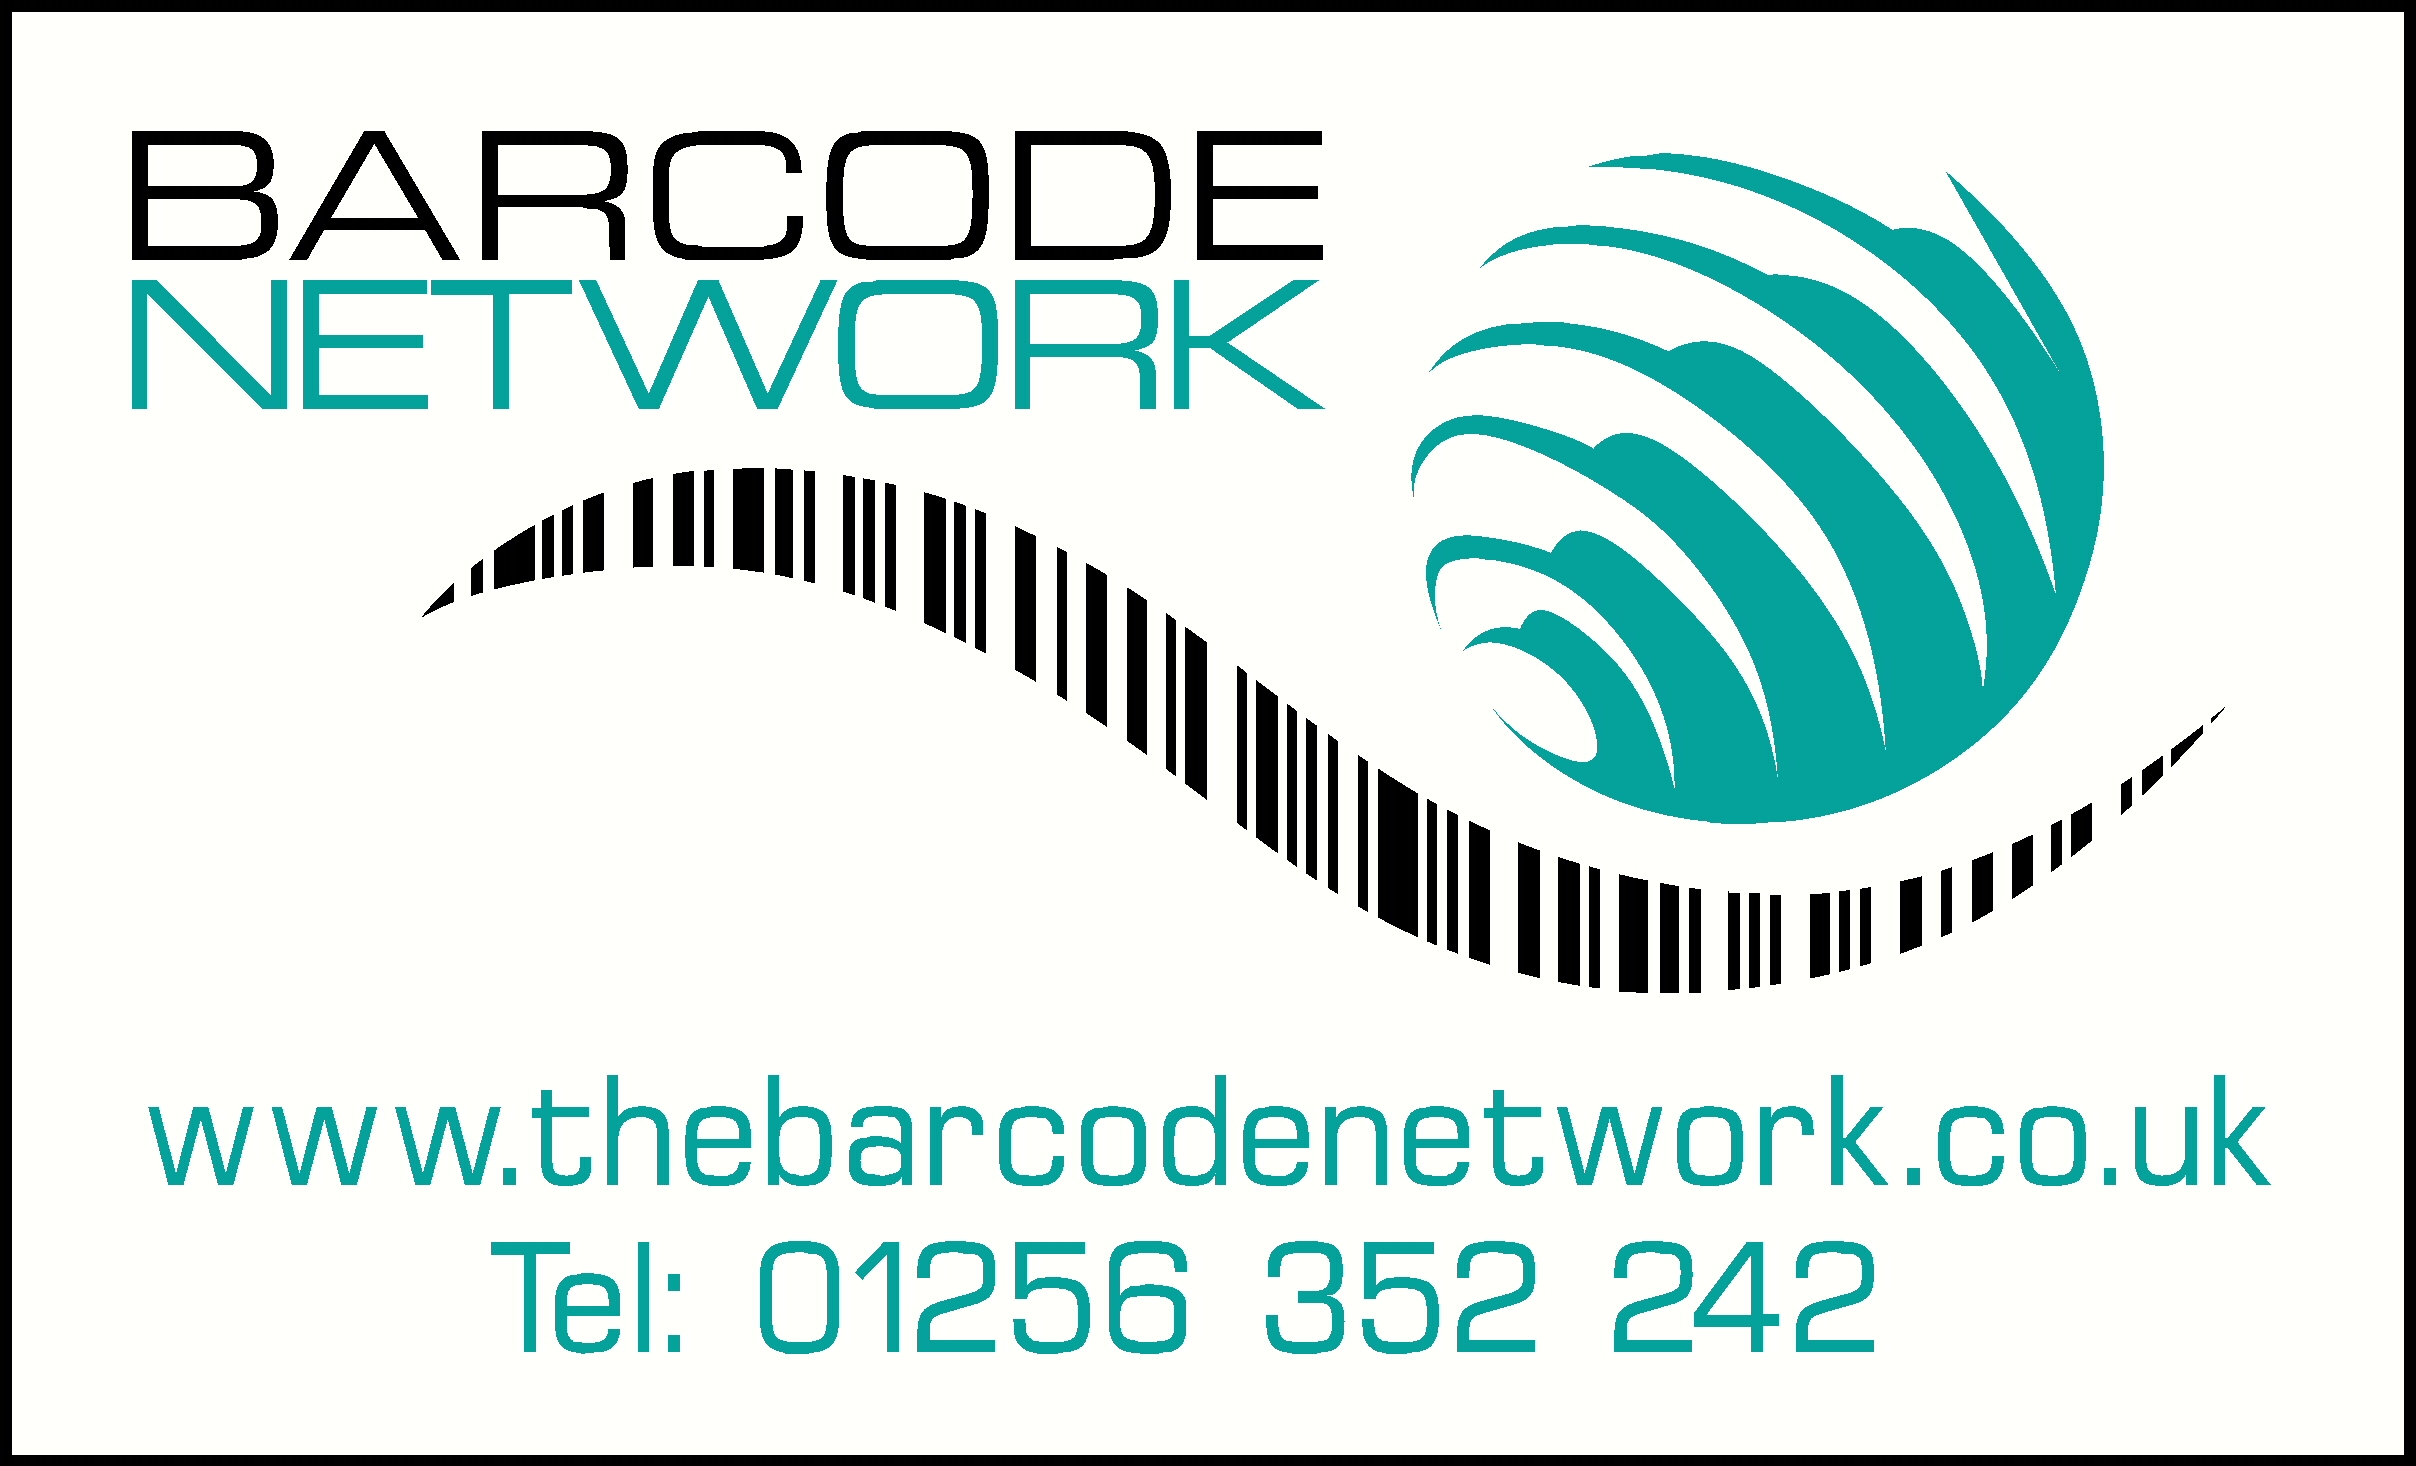 The Barcode Network